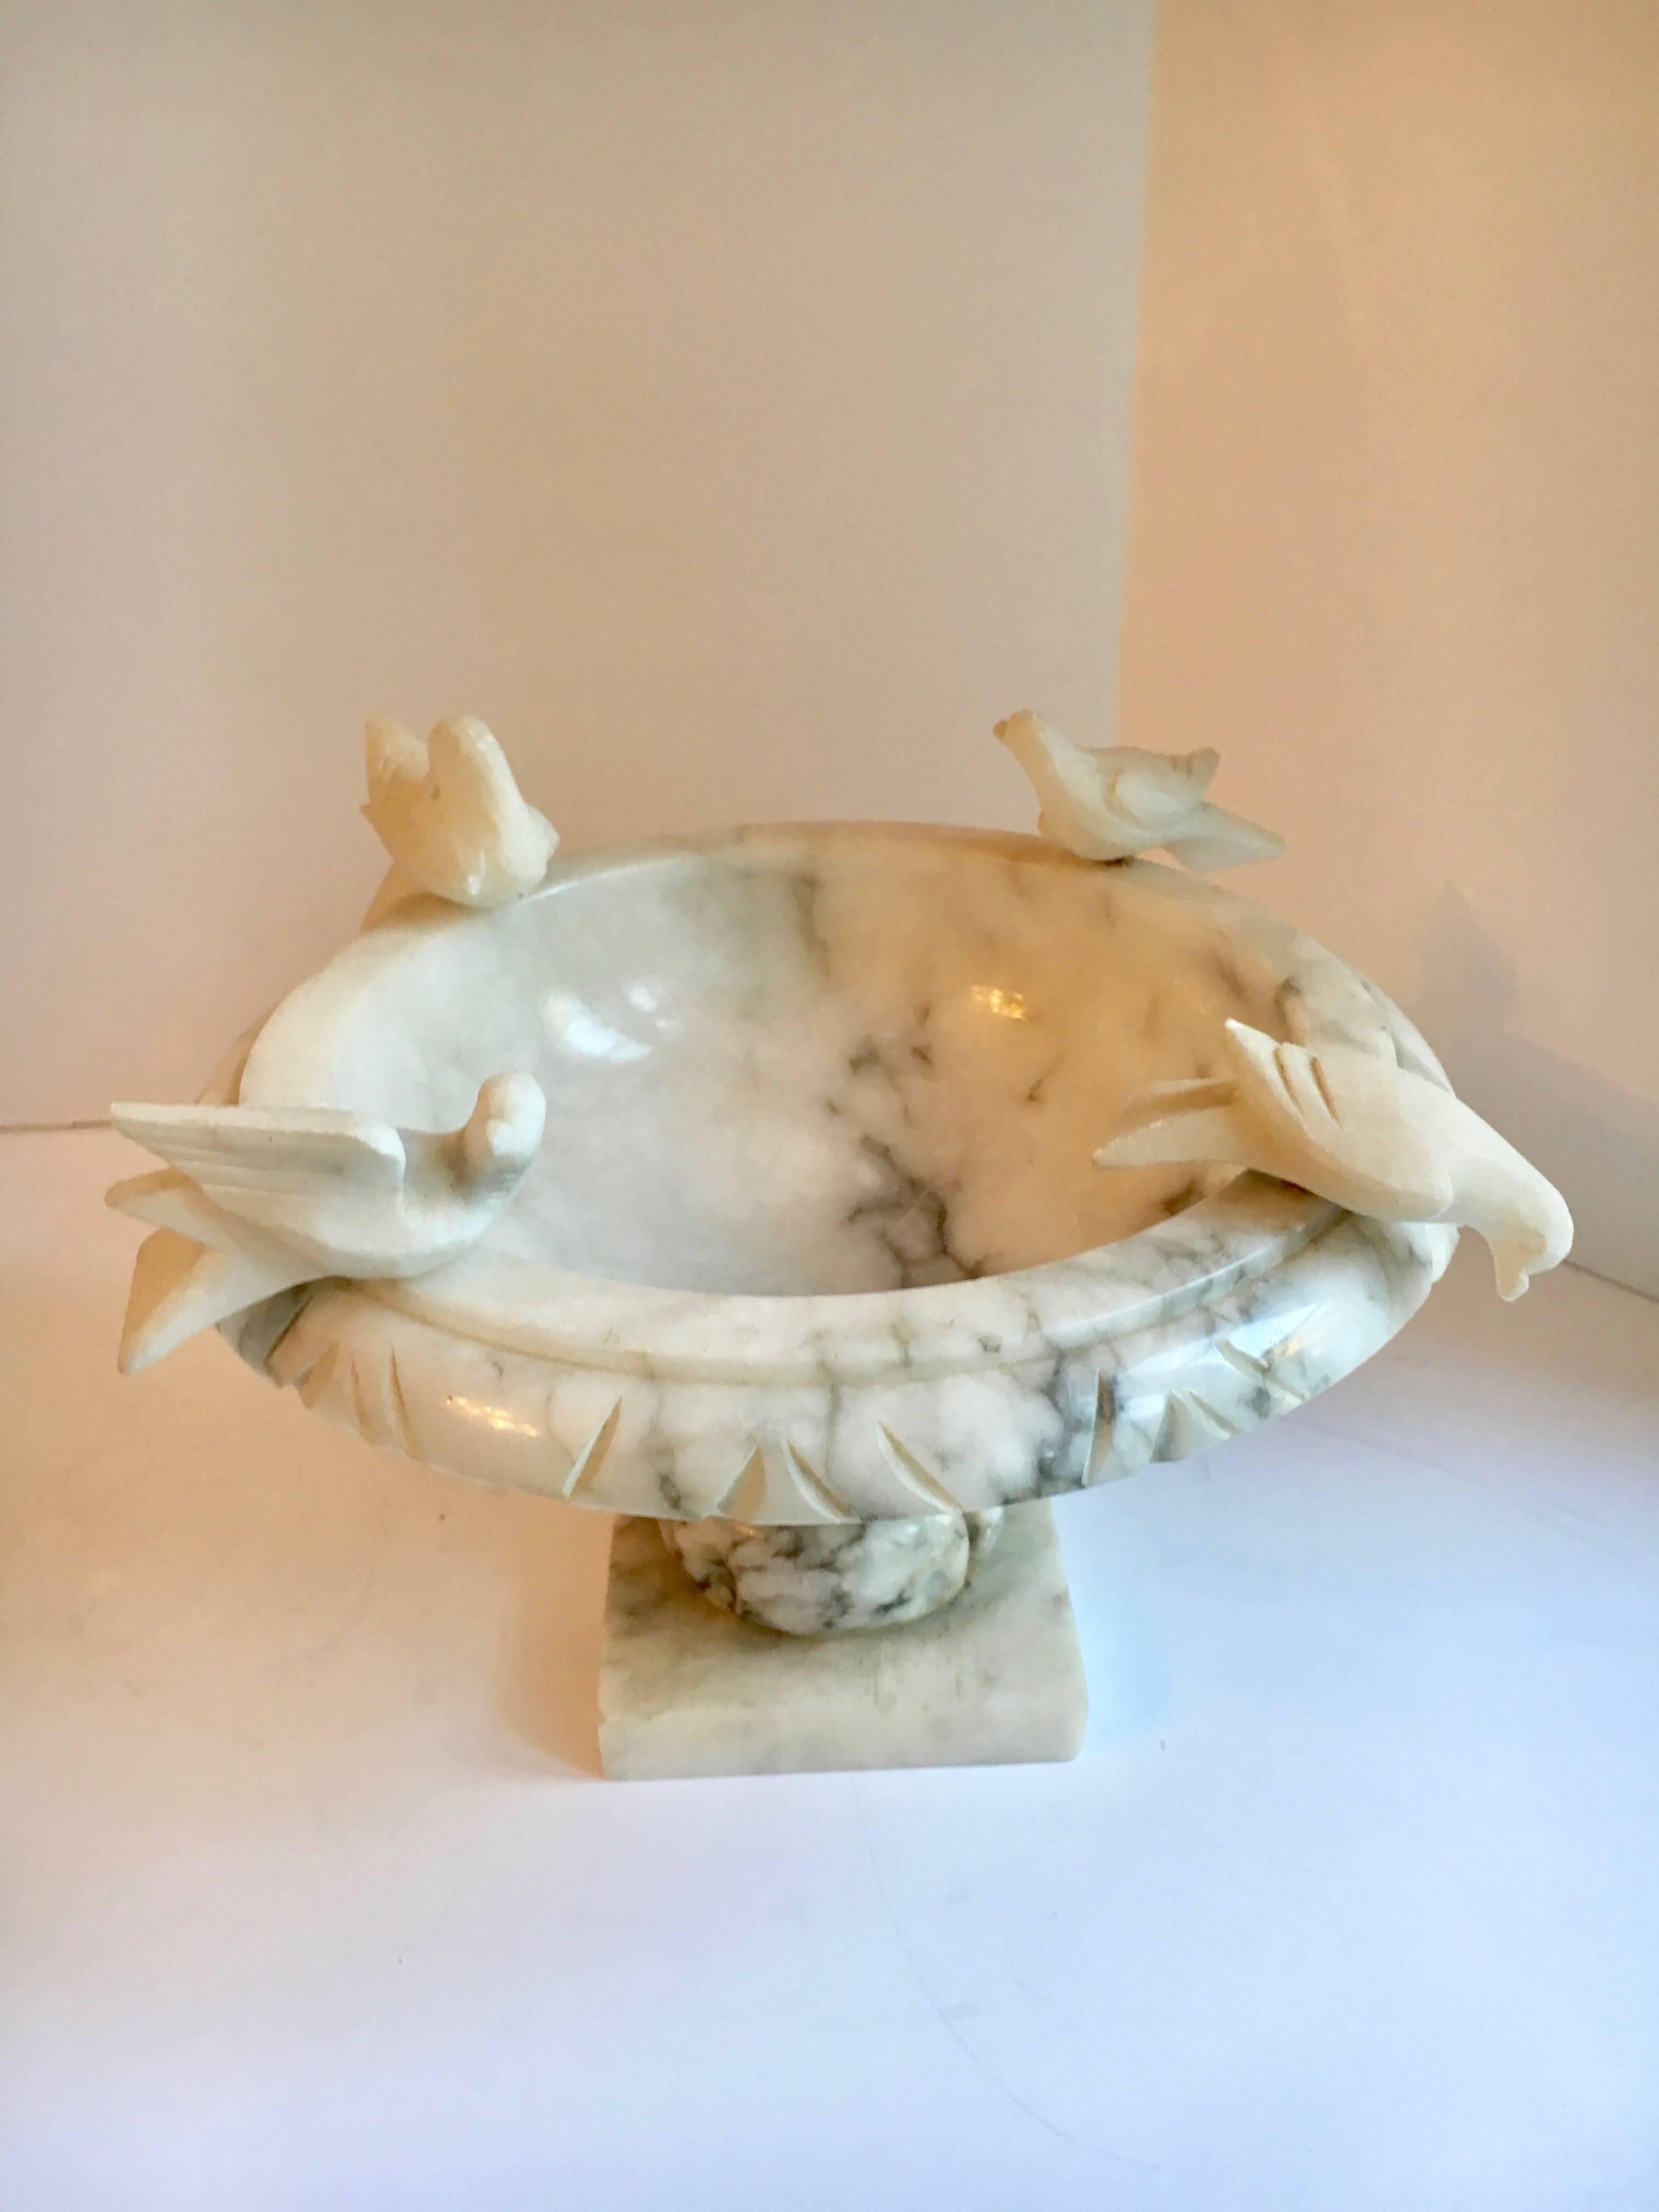 Marble footed bowl with carved birds, reminiscent of a bird bath, this lovely bowl is perfect for everything from flower petals to fruit or herbs. Works in any room, indoor or out.